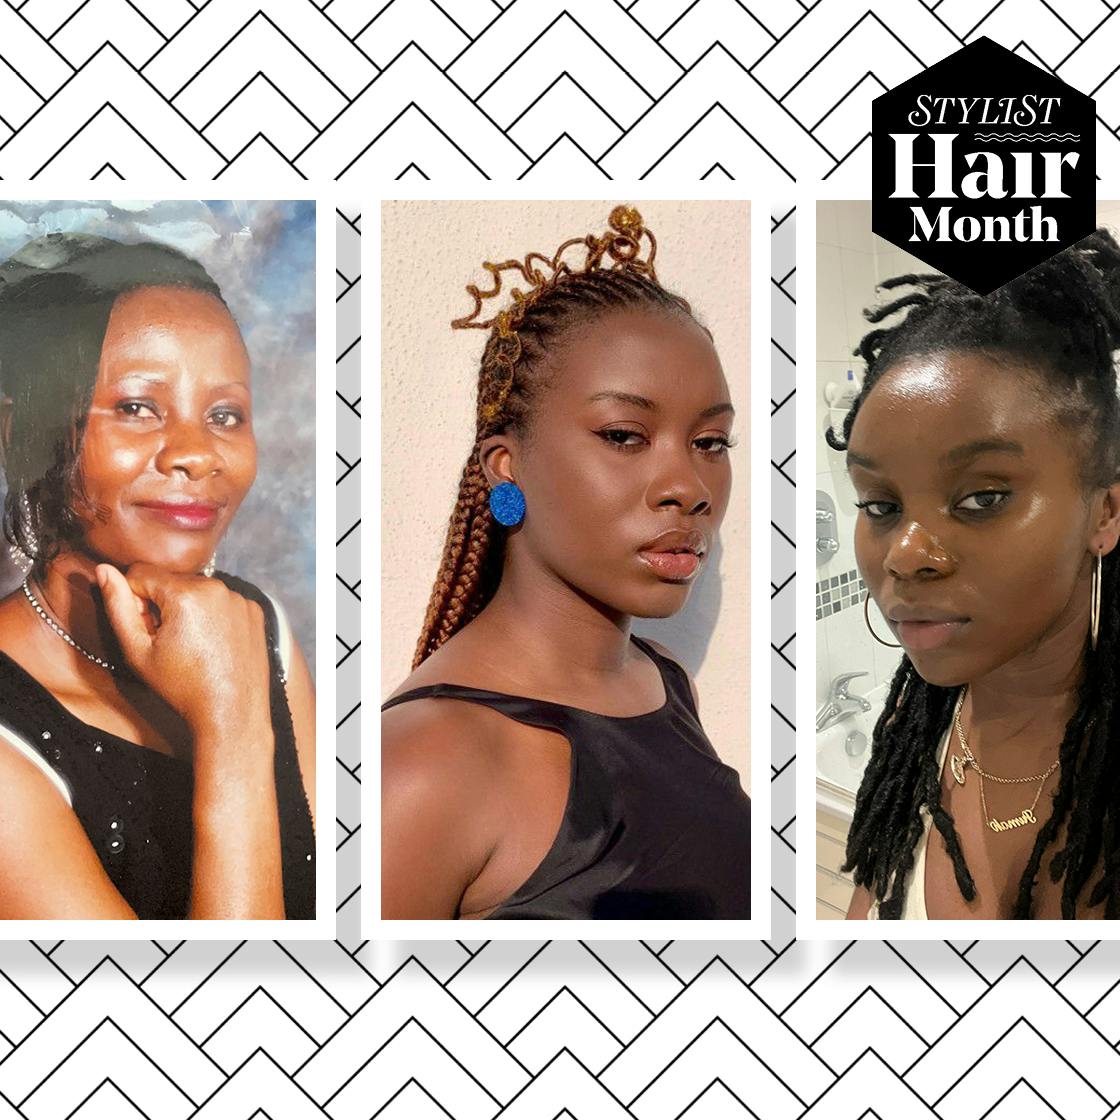 All hair textures are appropriate: 3 women reflect on the word